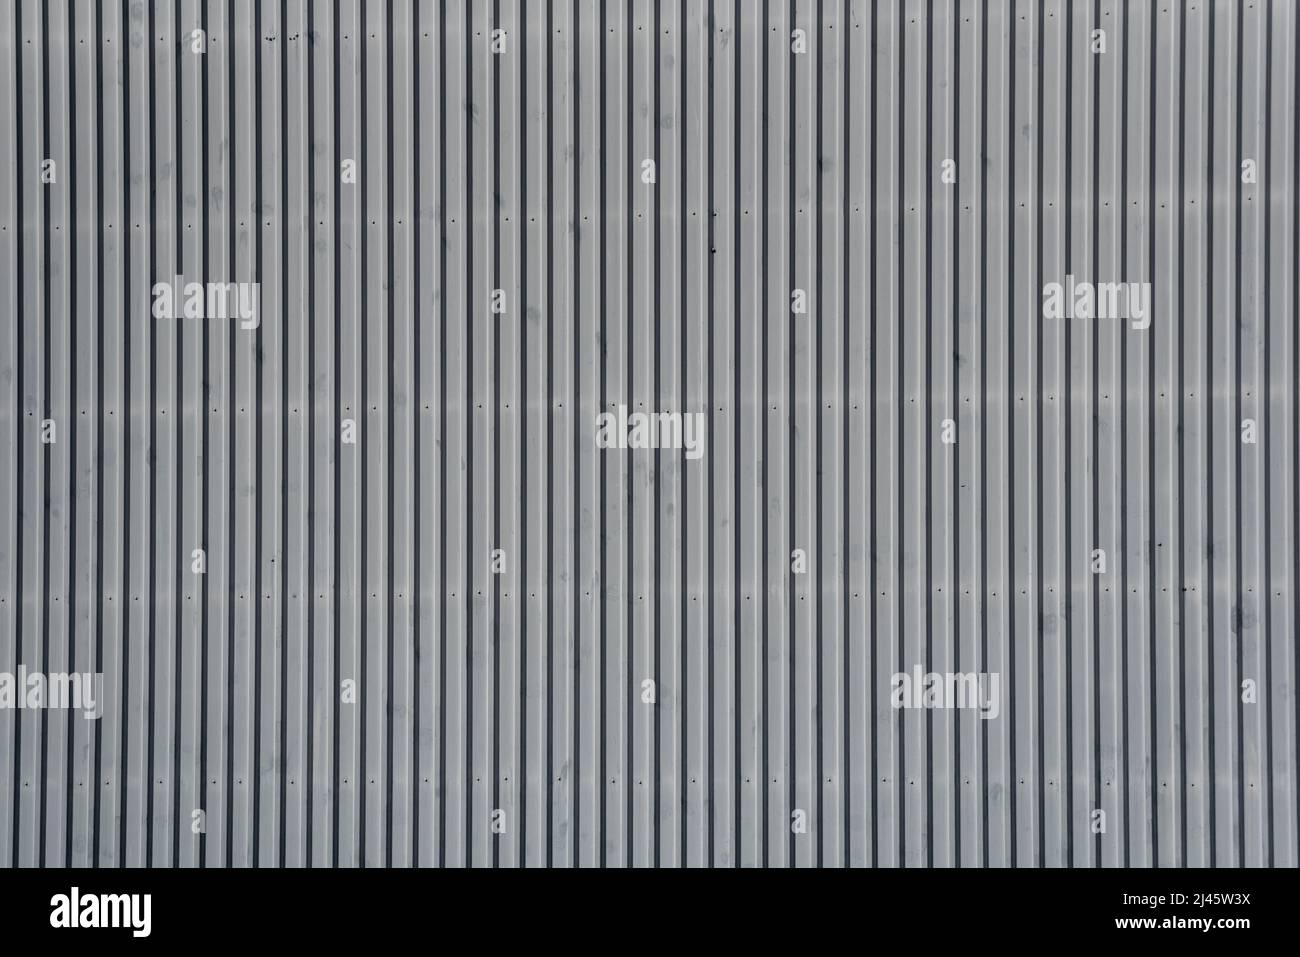 Architectural detail in close-up of grey corrugated steel industrial building facade with vertical lines forming symmetric abstract pattern Stock Photo